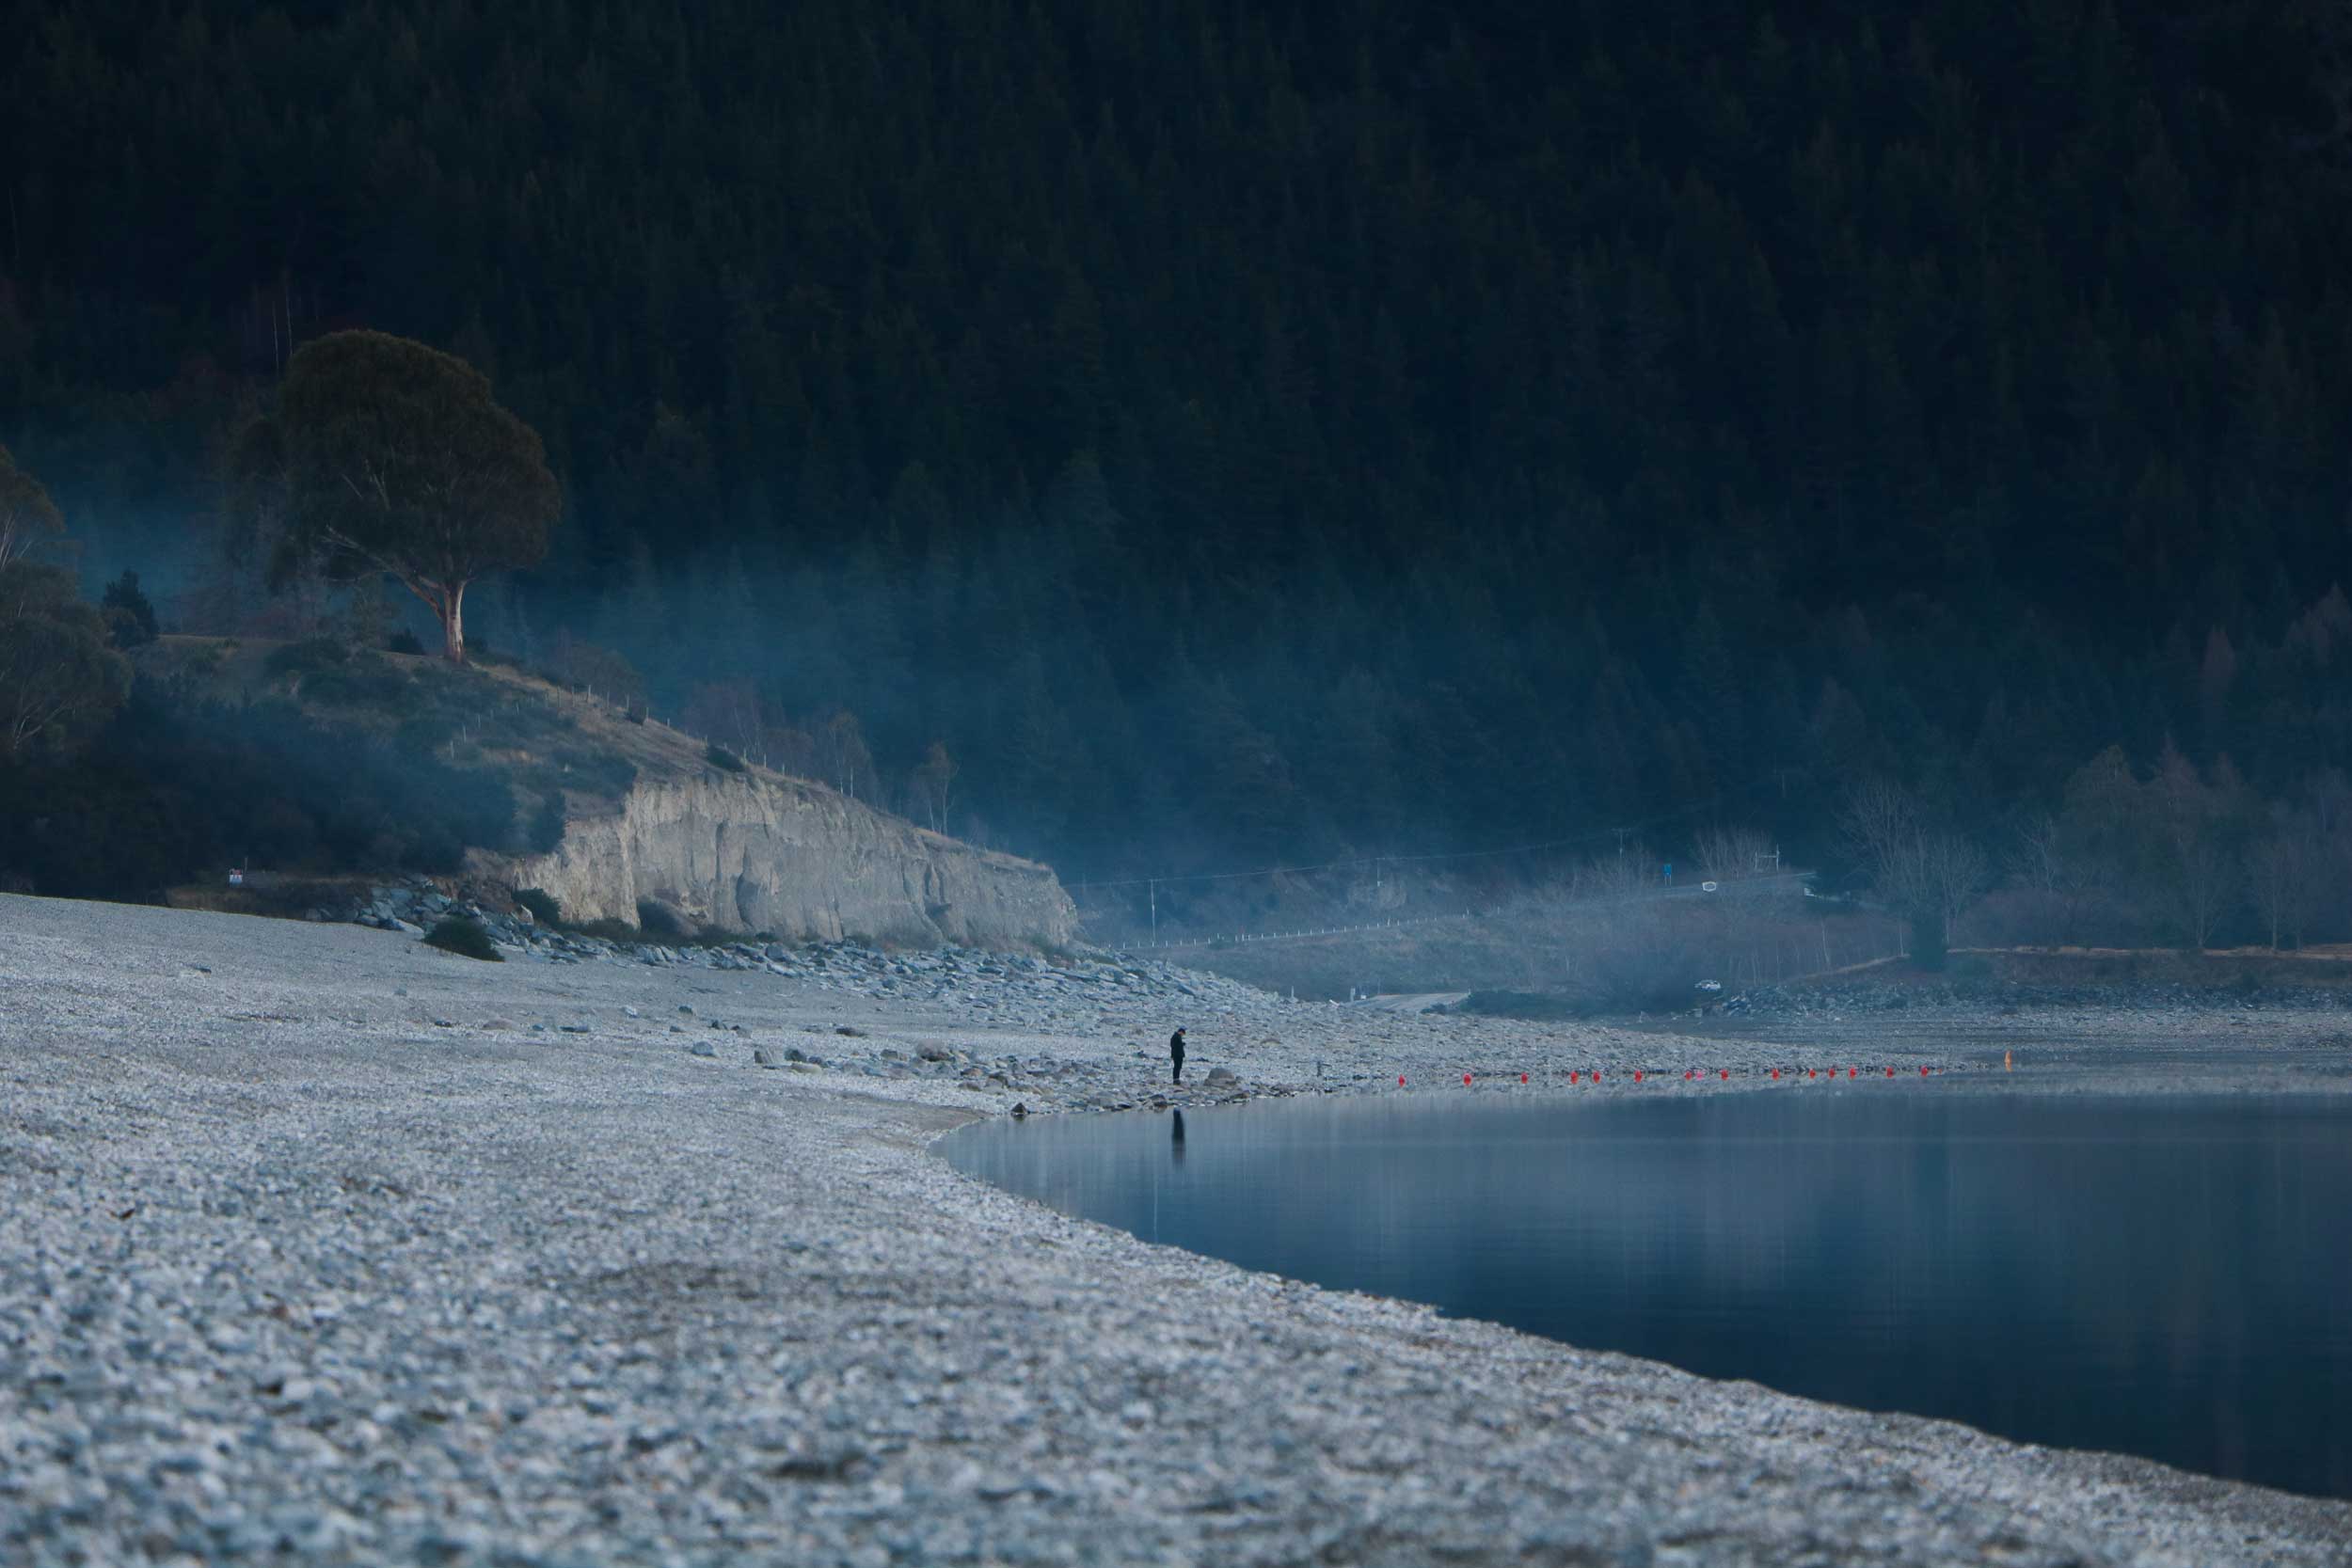 Man standing on a vast stony bank right at the edge of the lake's water, New Zealand